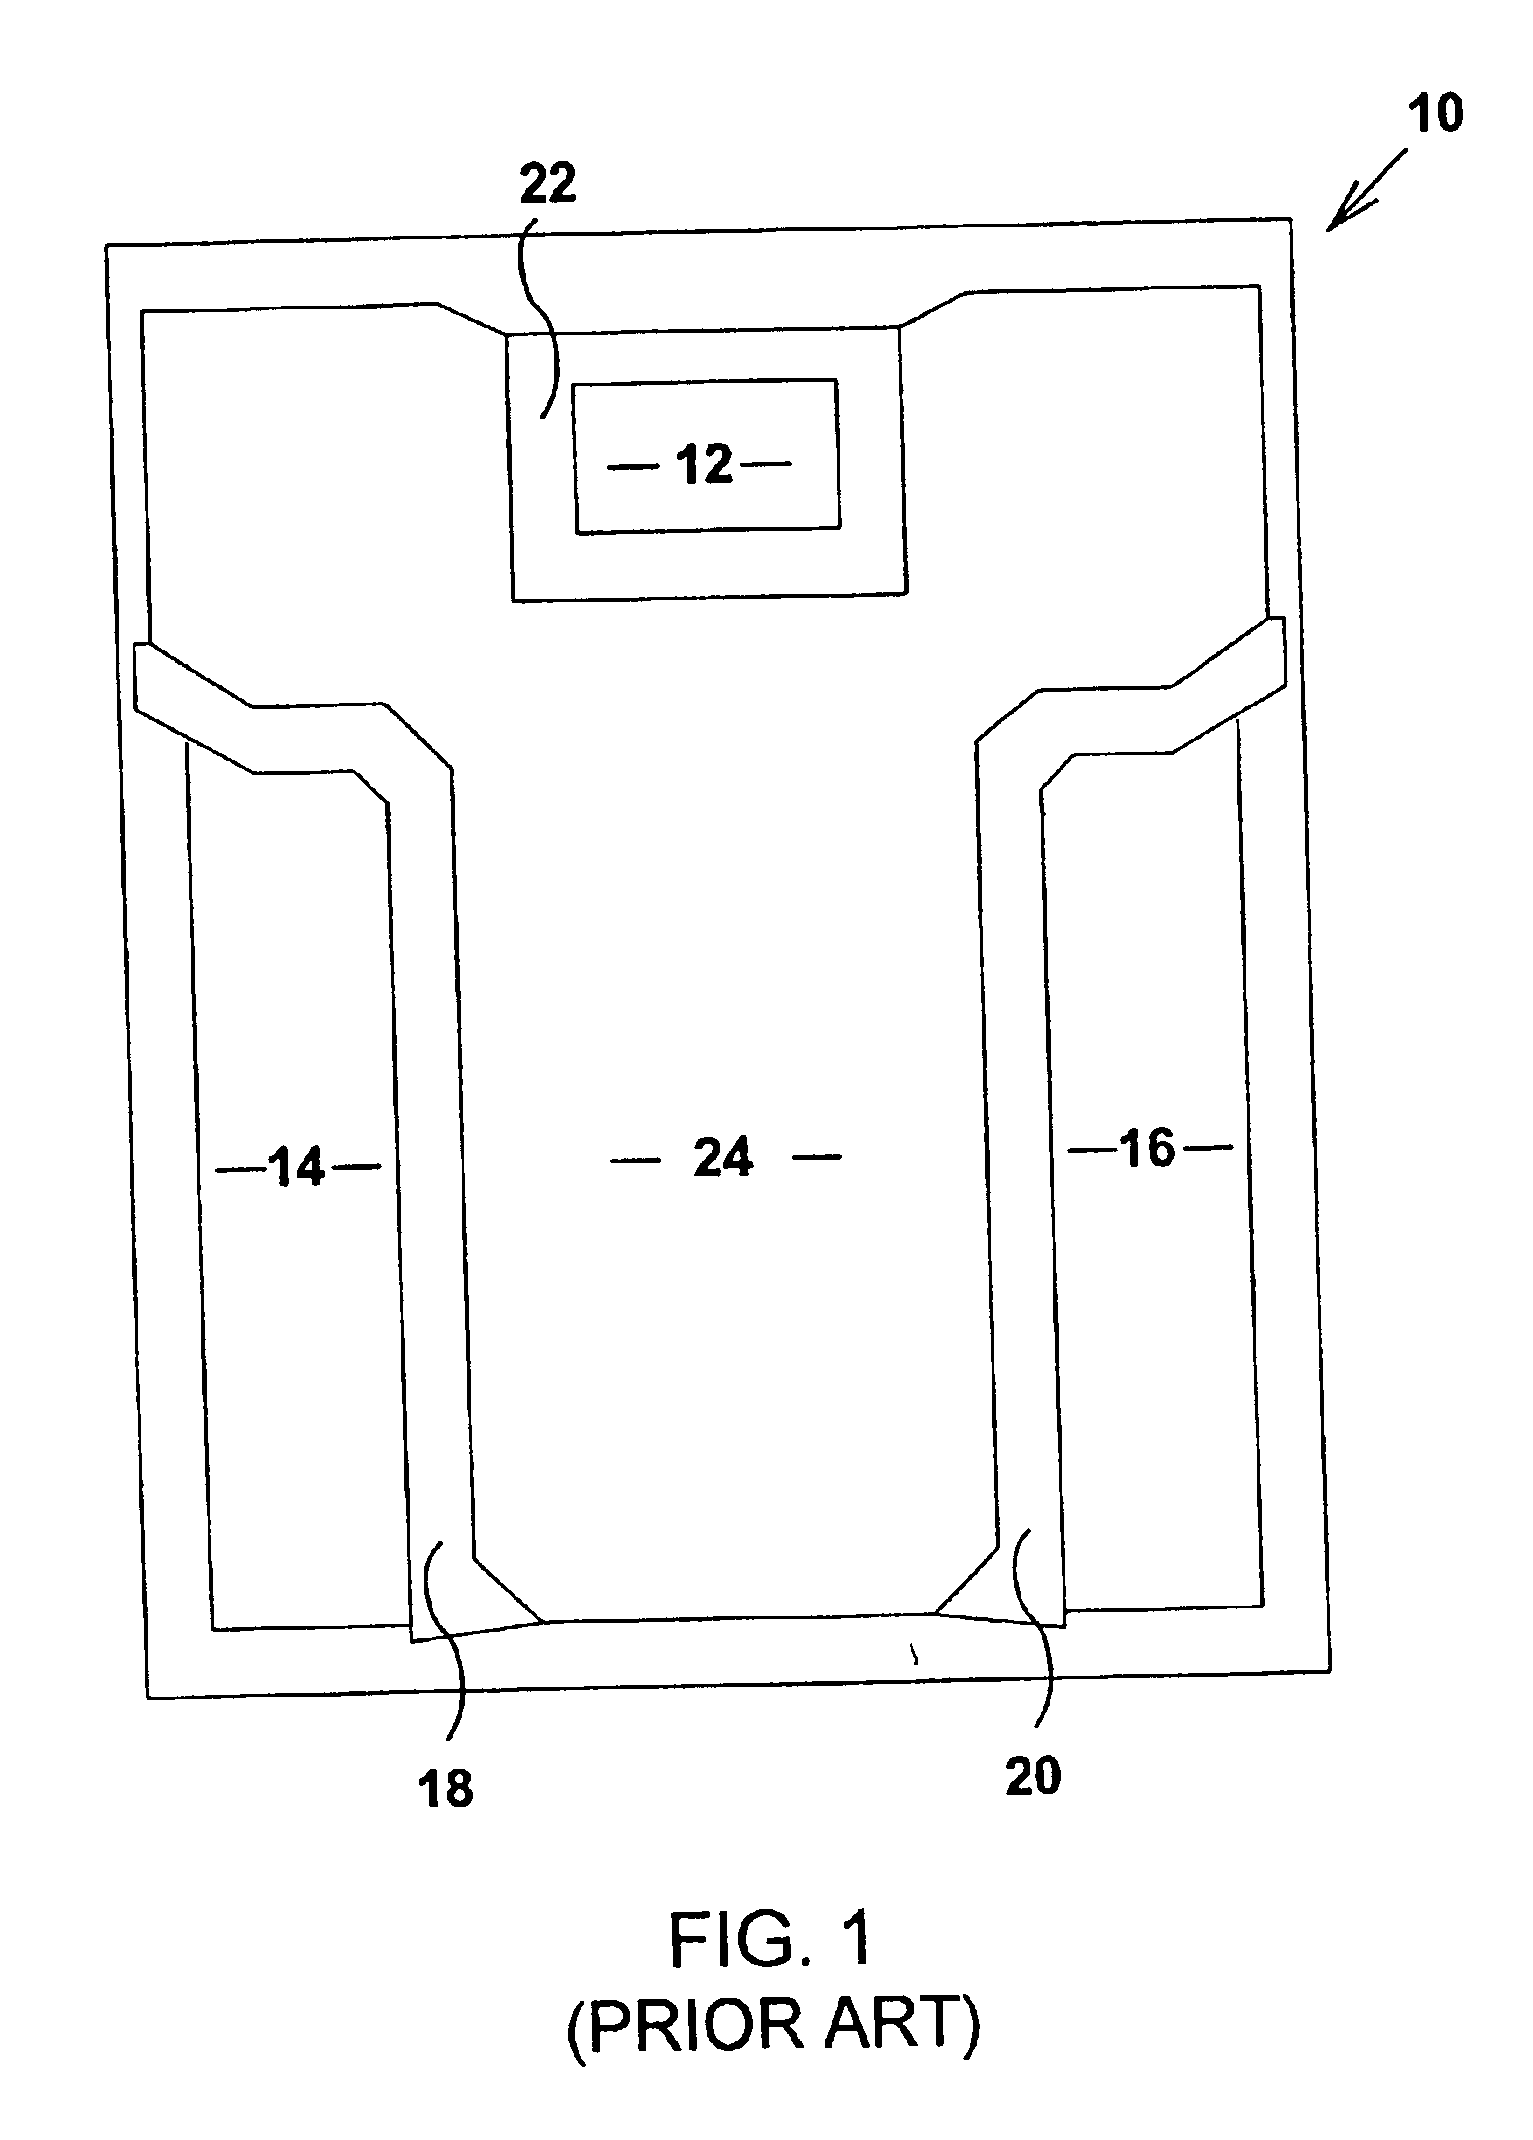 Alignment and correction template for optical profilometric measurement